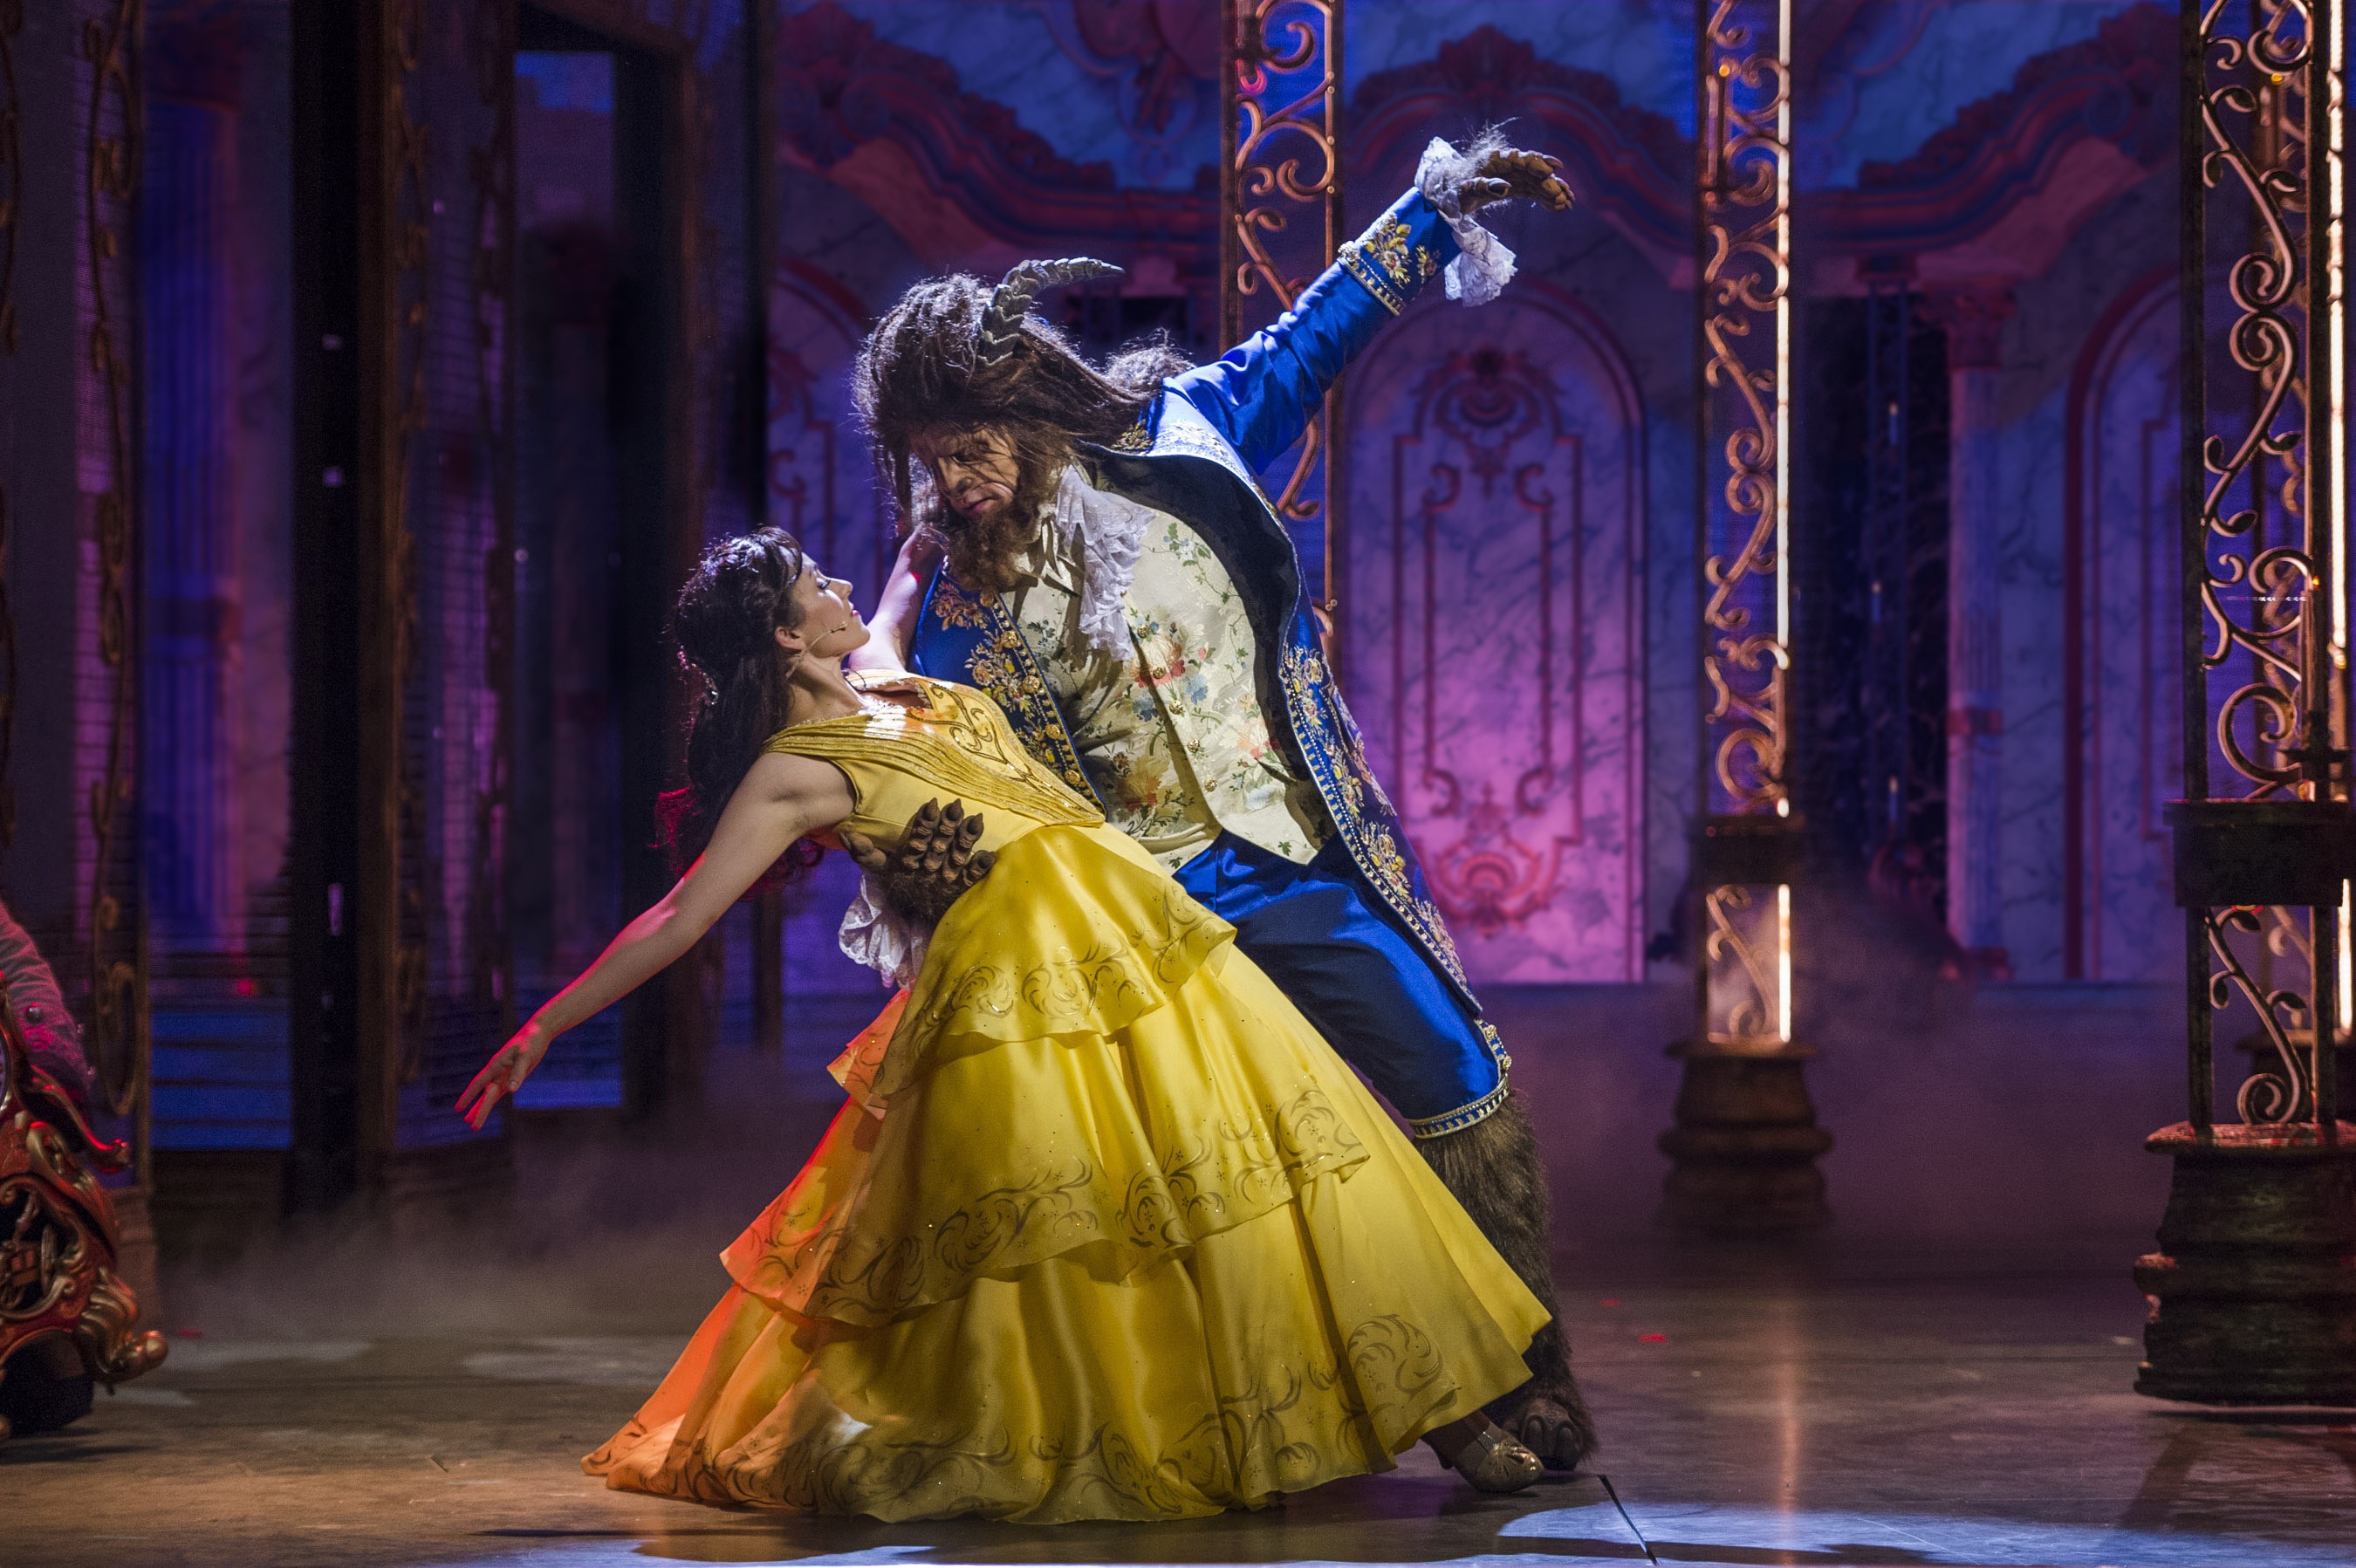 A tale as old as time takes the stage on the Disney Dream with “Beauty and the Beast,” an original musical production. The enchanting fairytale takes audiences on a sweeping journey to discover the power of transformation through true love and courage. Th (Foto: Steven Diaz, photographer)